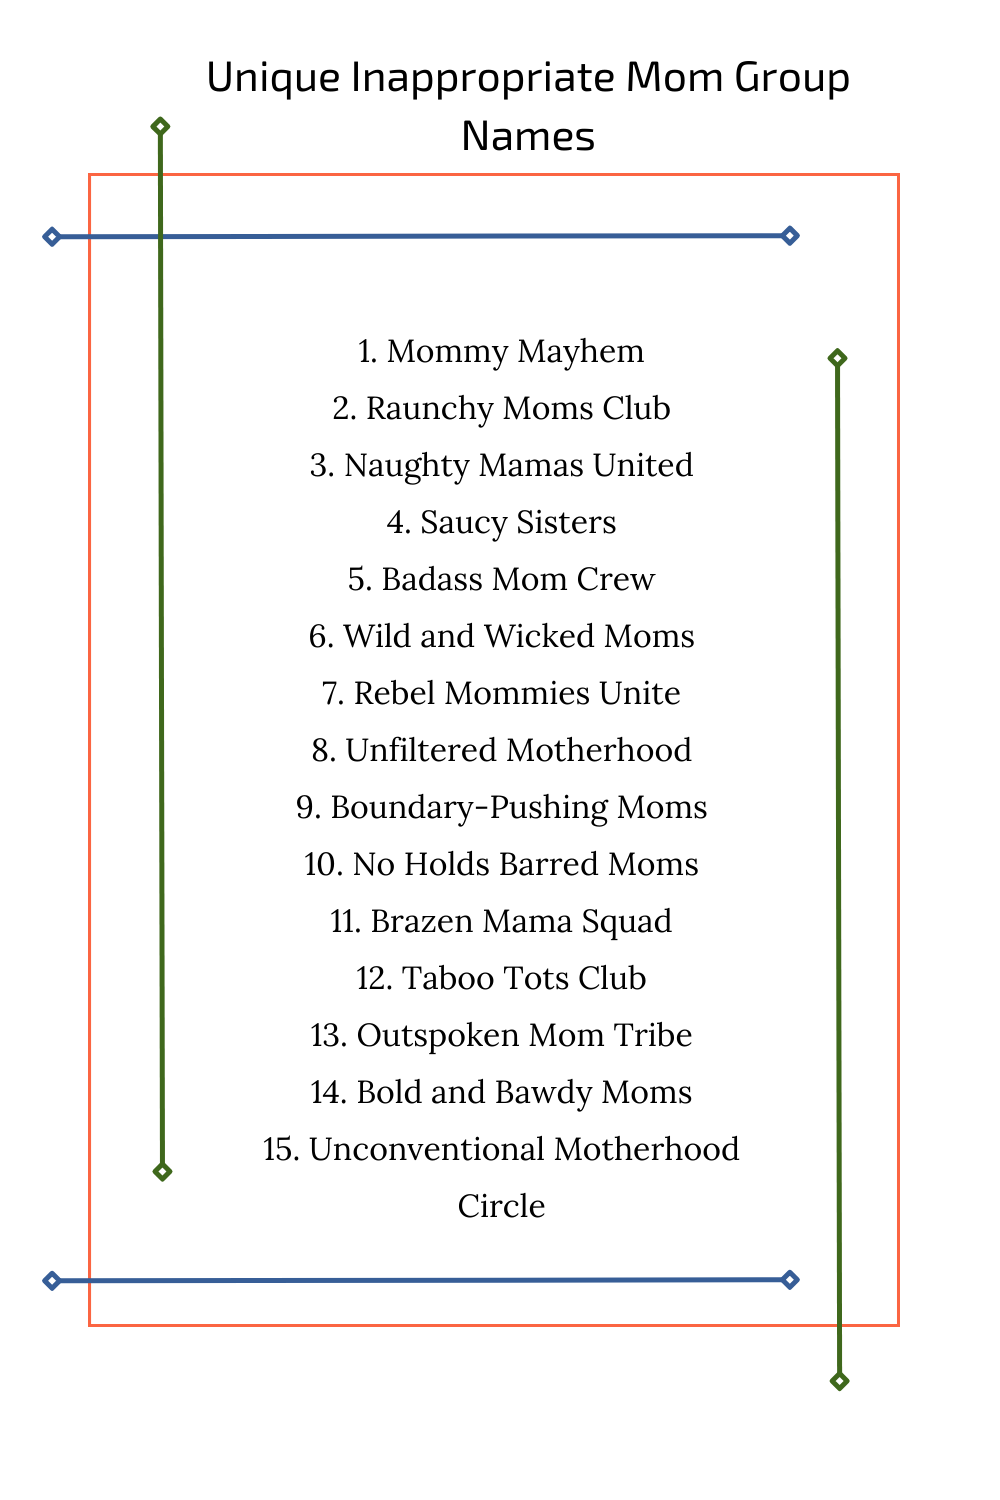 Unique Inappropriate Mom Group Names